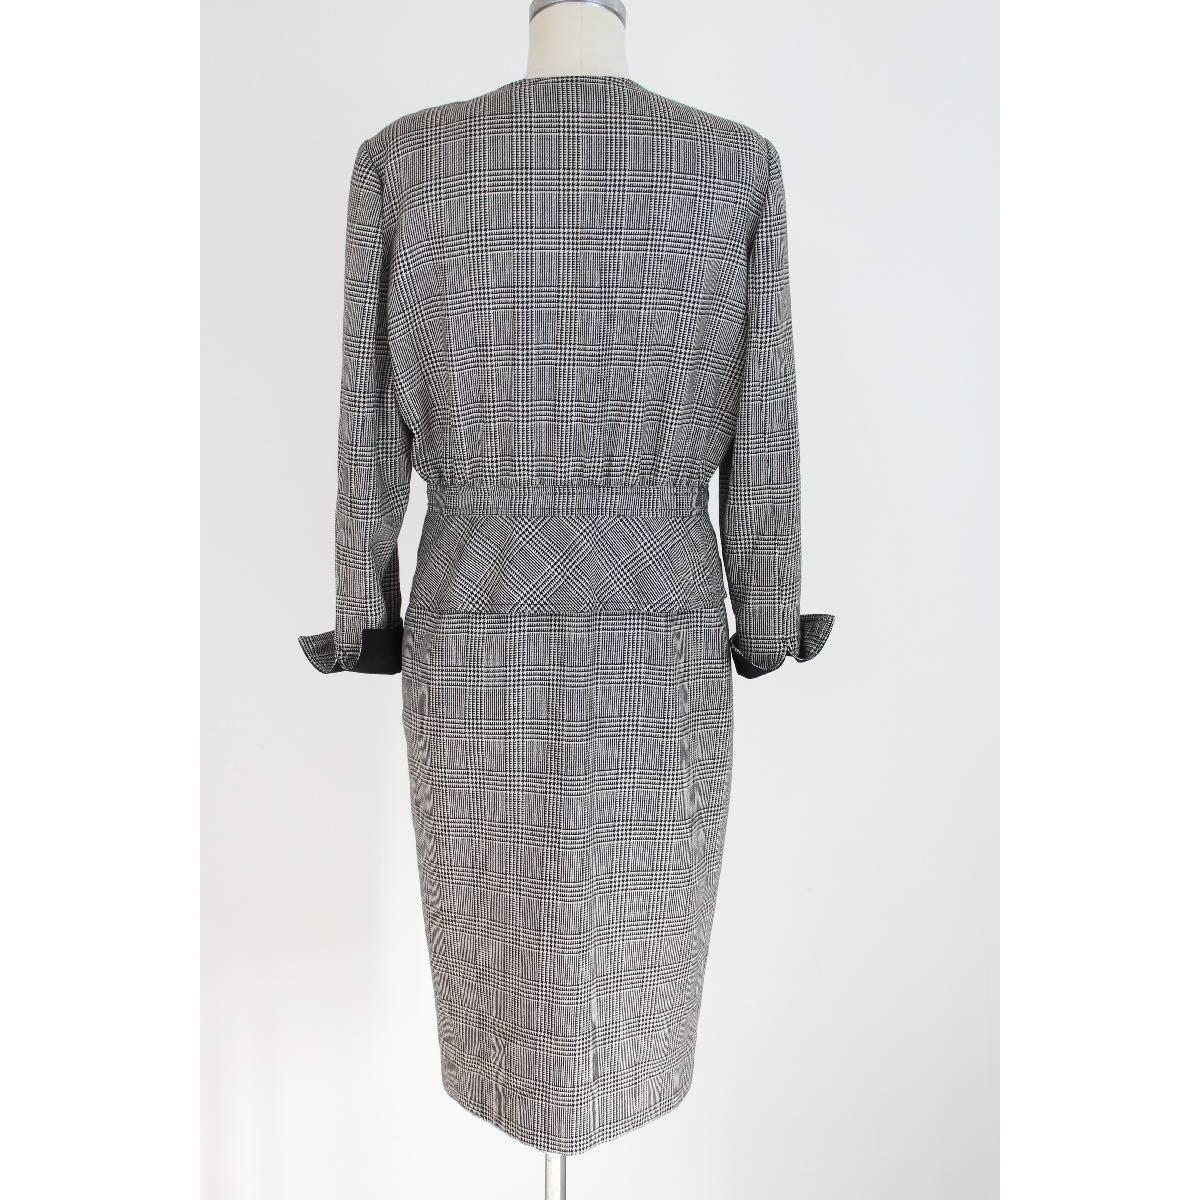 Valentino vintage woman dress. Black and white wool check. Exceptional elegance with mother-of-pearl buttons. The dress is lined under the skirt, in rayon and acetate. the cuffs of the sleeves are turned up show a particular black. Beautiful in all